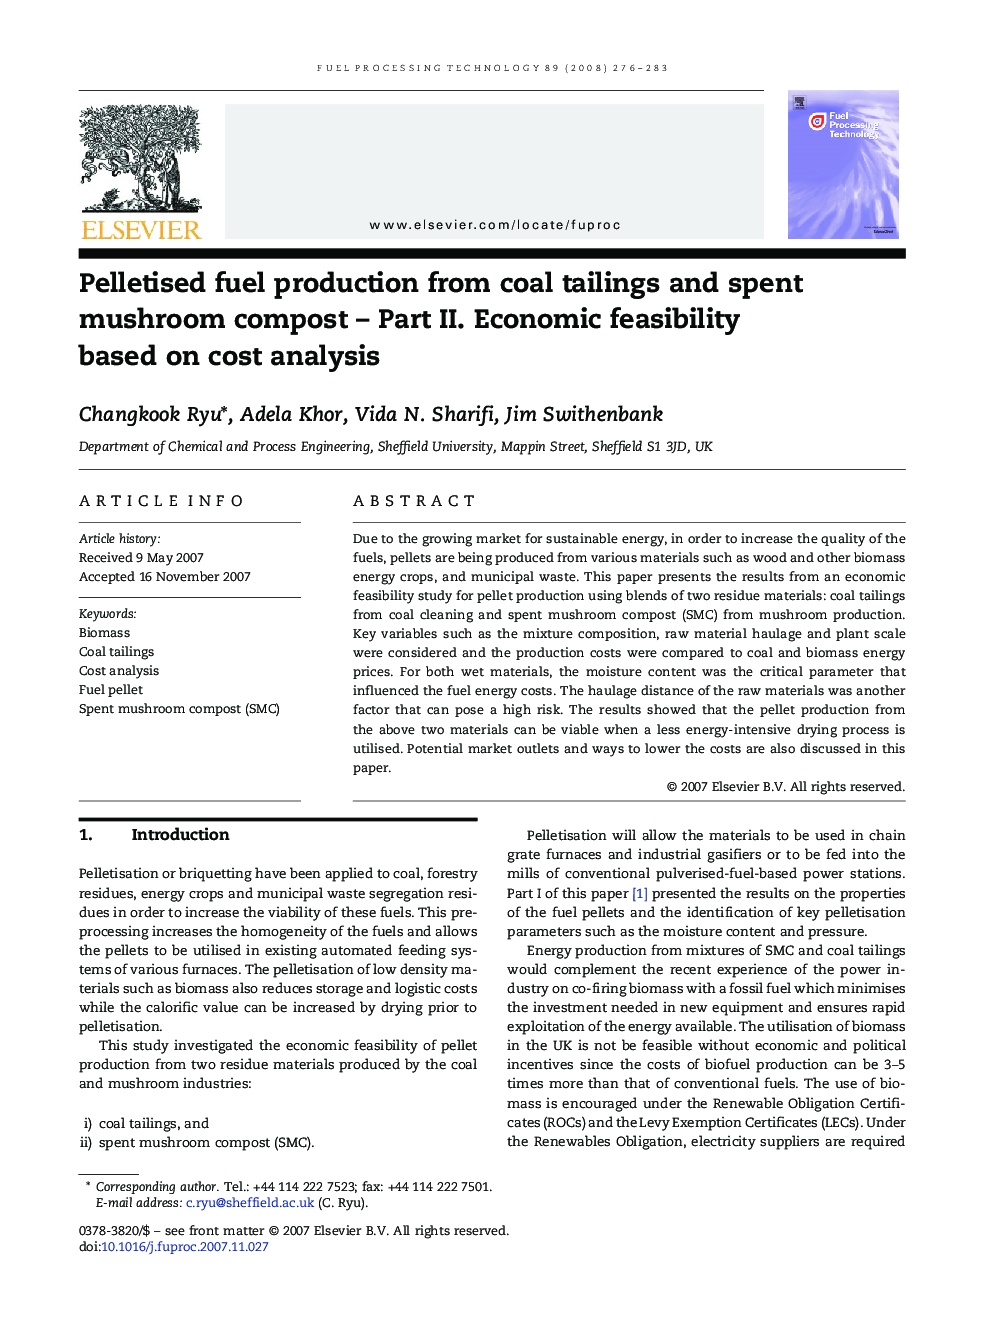 Pelletised fuel production from coal tailings and spent mushroom compost – Part II. Economic feasibility based on cost analysis